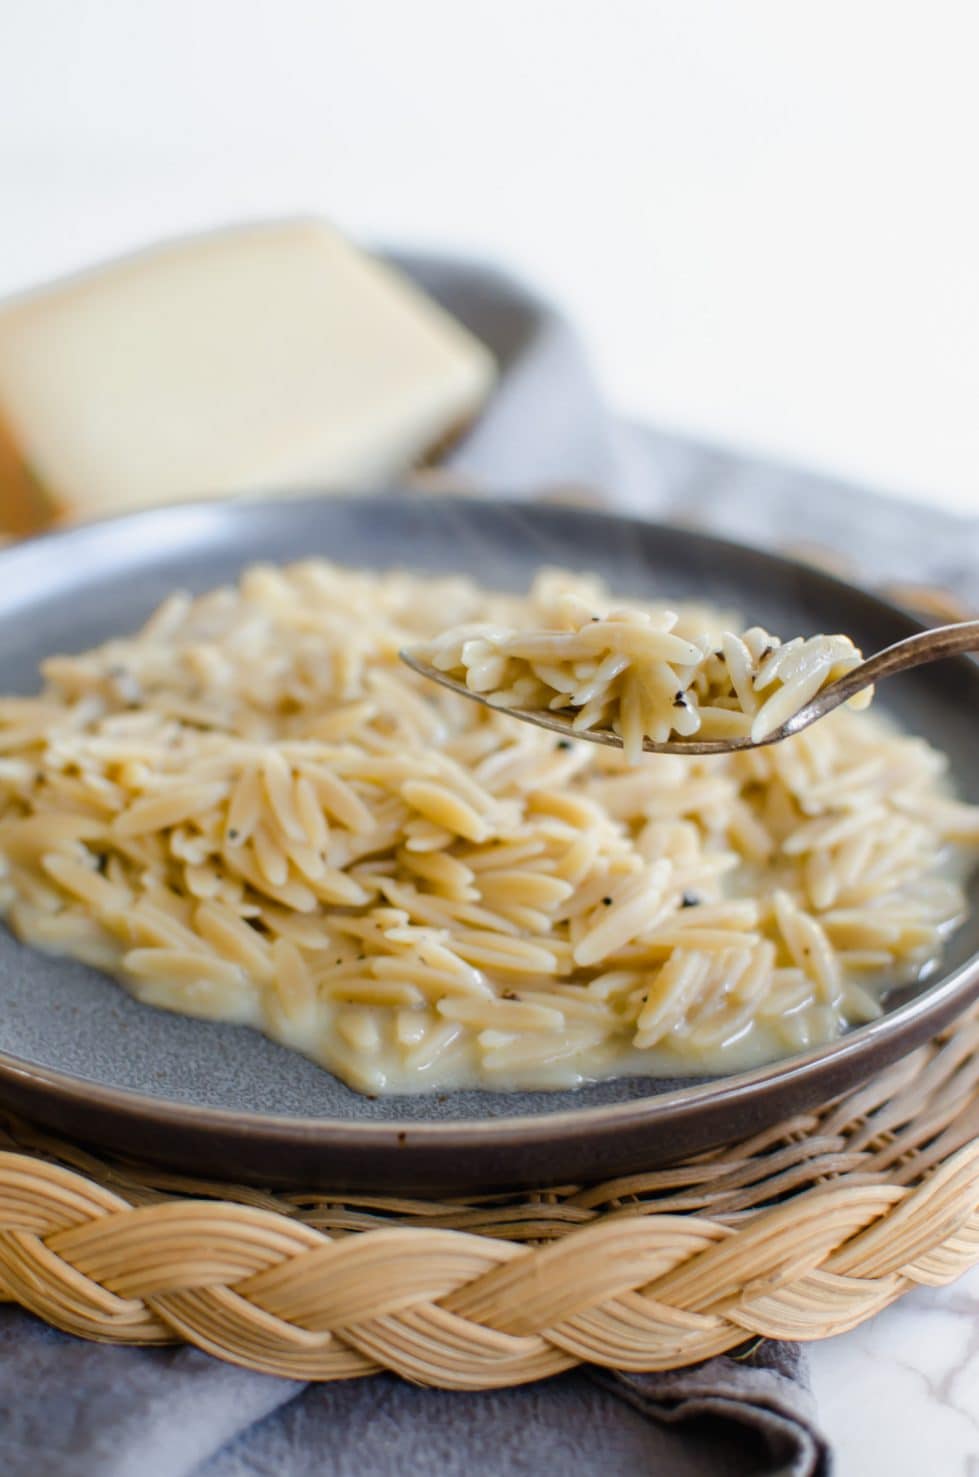 This simple recipe for Orzo Cacio e Pepe is a great option for a side dish on a weeknight to serve with grilled or roasted meats, fish, or a simple side salad! Easy Italian food that is healthy and tastes delicious!